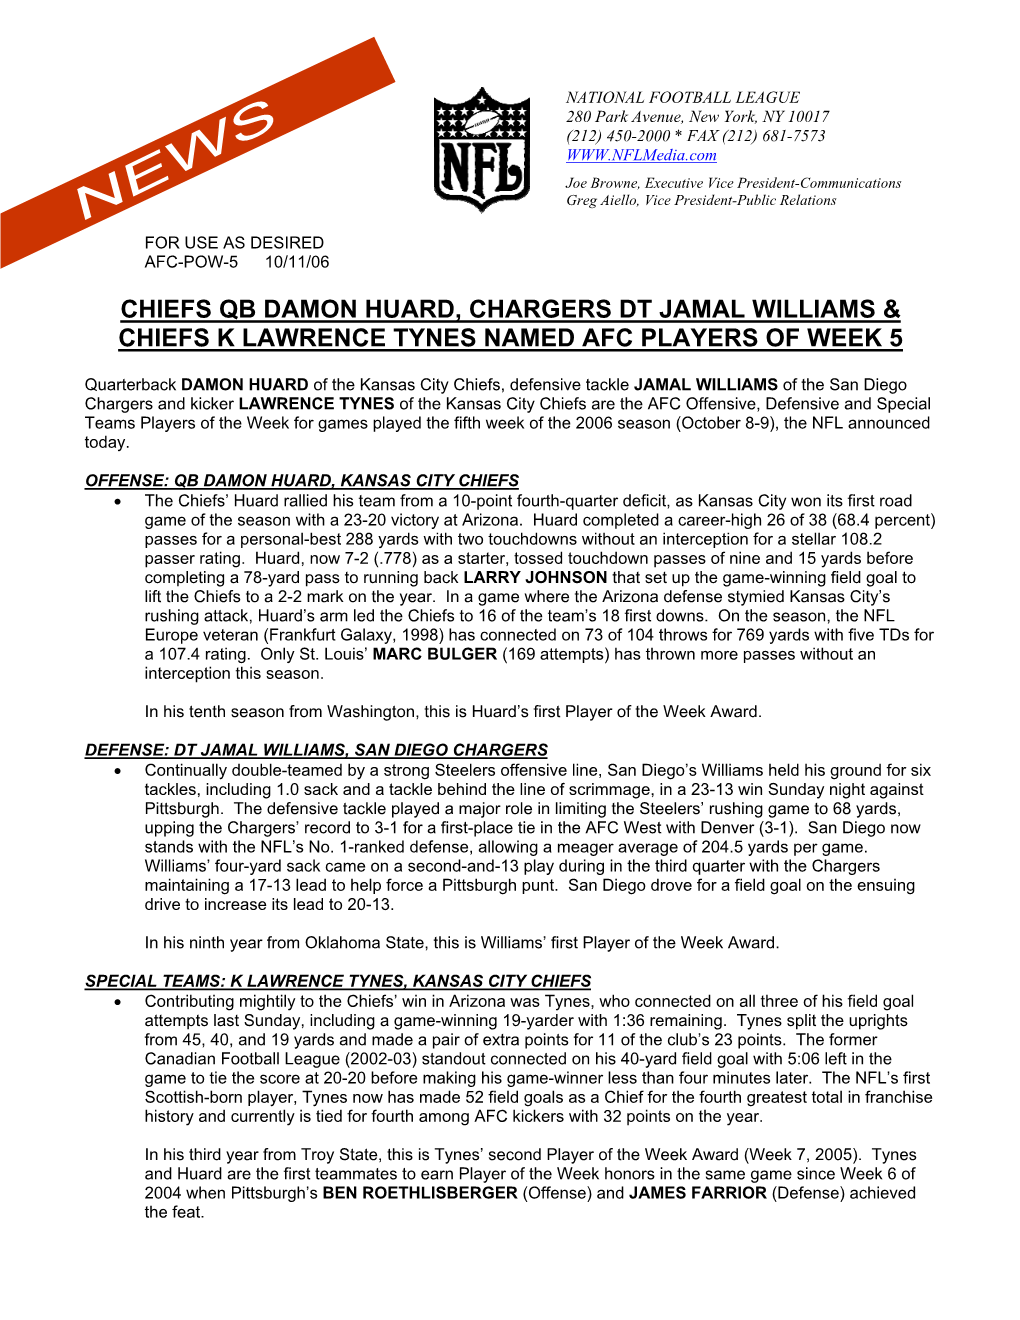 Chiefs Qb Damon Huard, Chargers Dt Jamal Williams & Chiefs K Lawrence Tynes Named Afc Players of Week 5